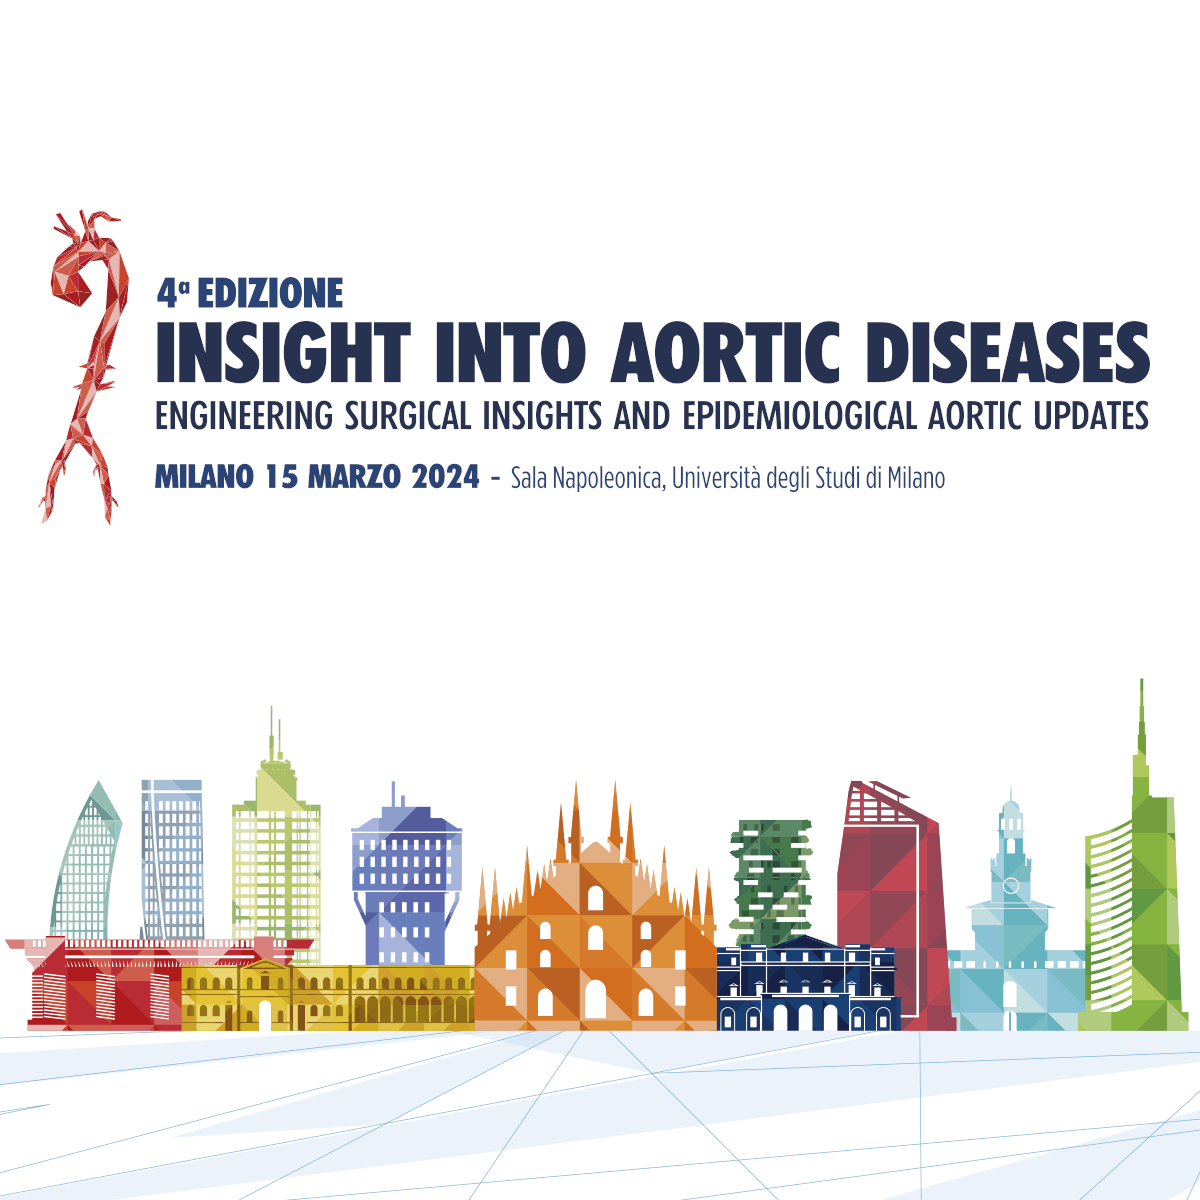 Insight into aortic diseases Milano 2024